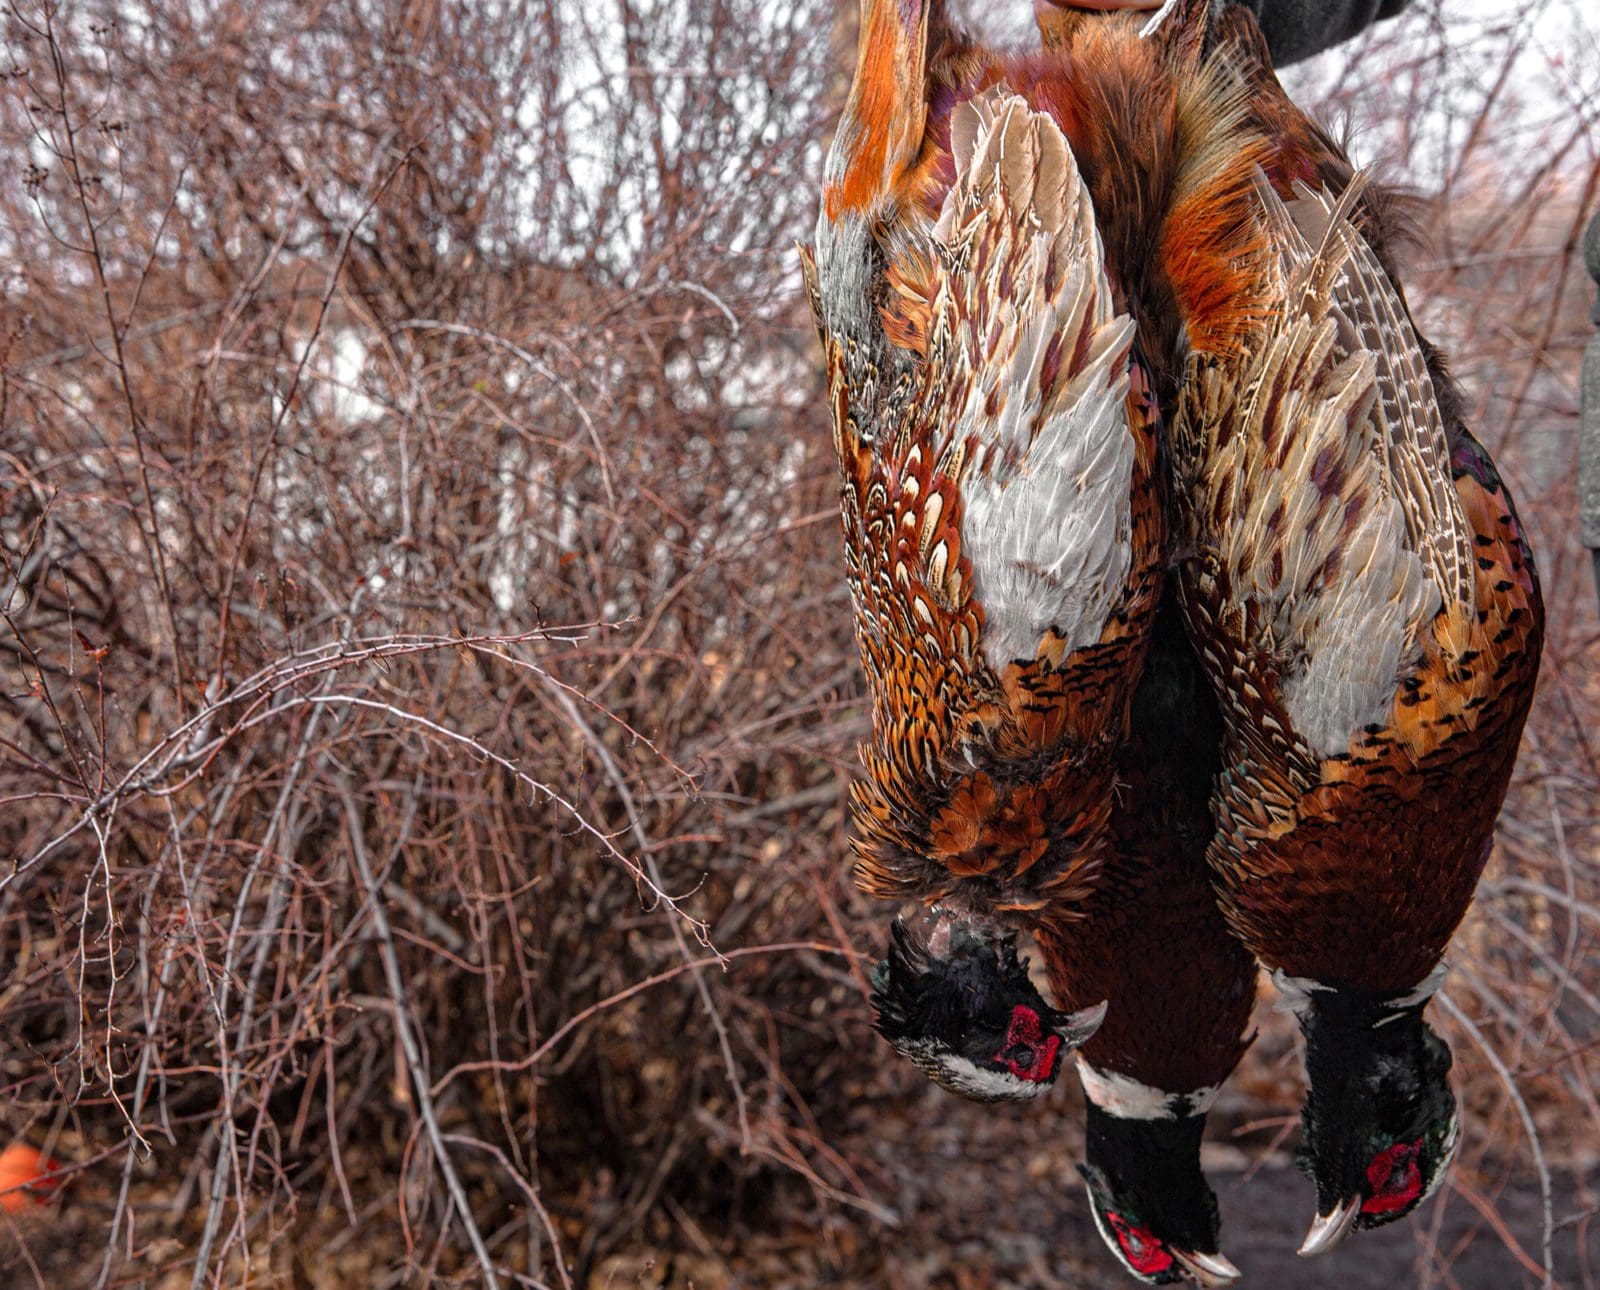 Pheasants hang in the field after being shot.